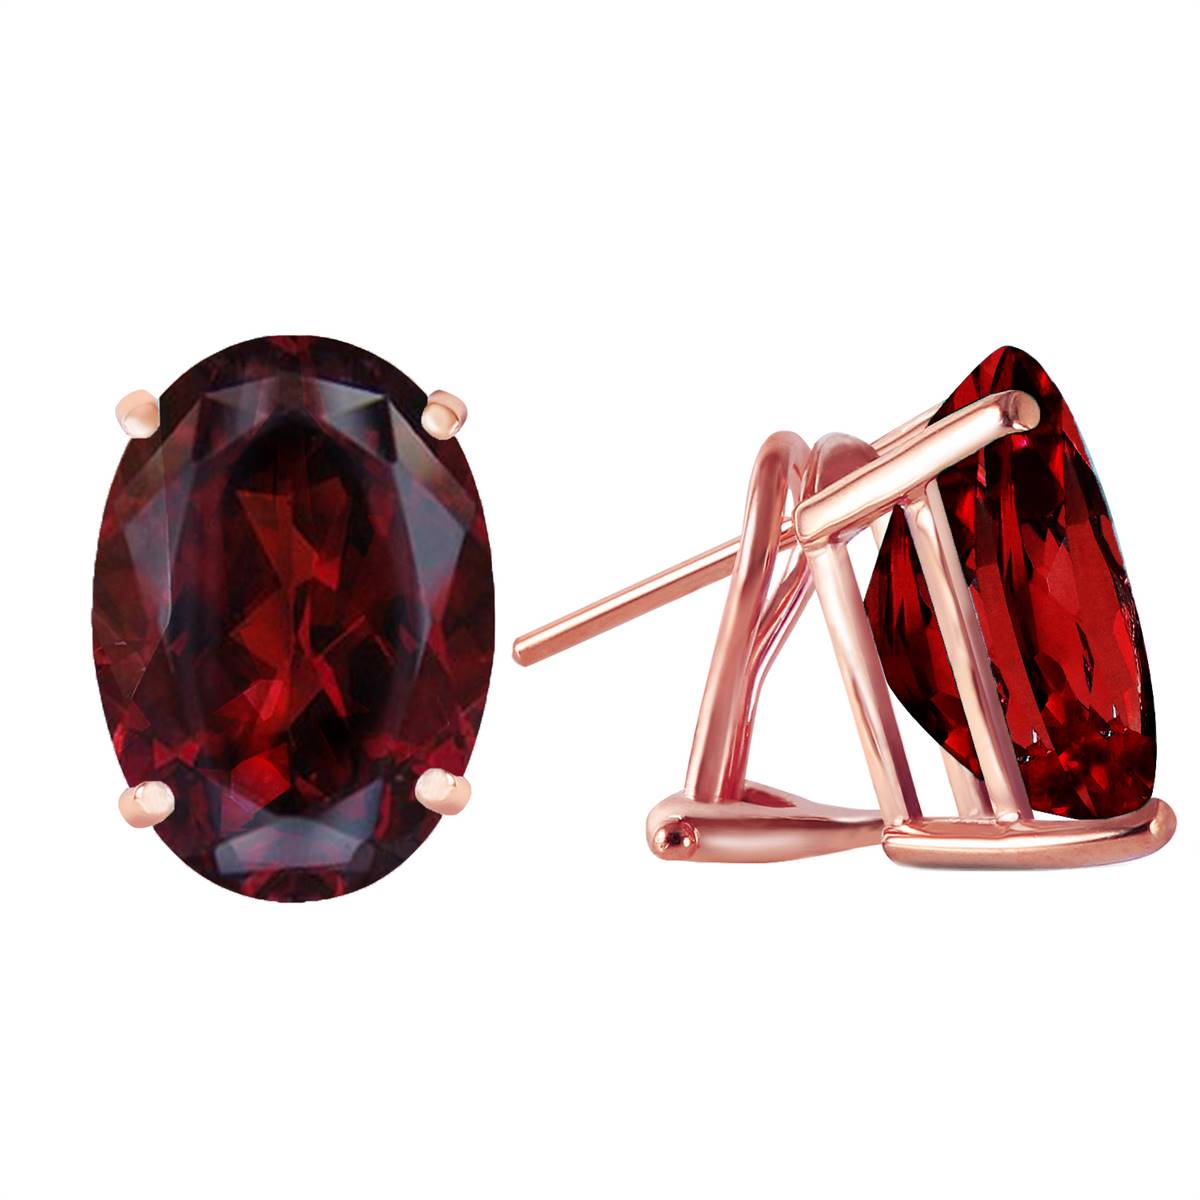 13 Carat 14K Solid Rose Gold French Clips Earrings Natural Garnet